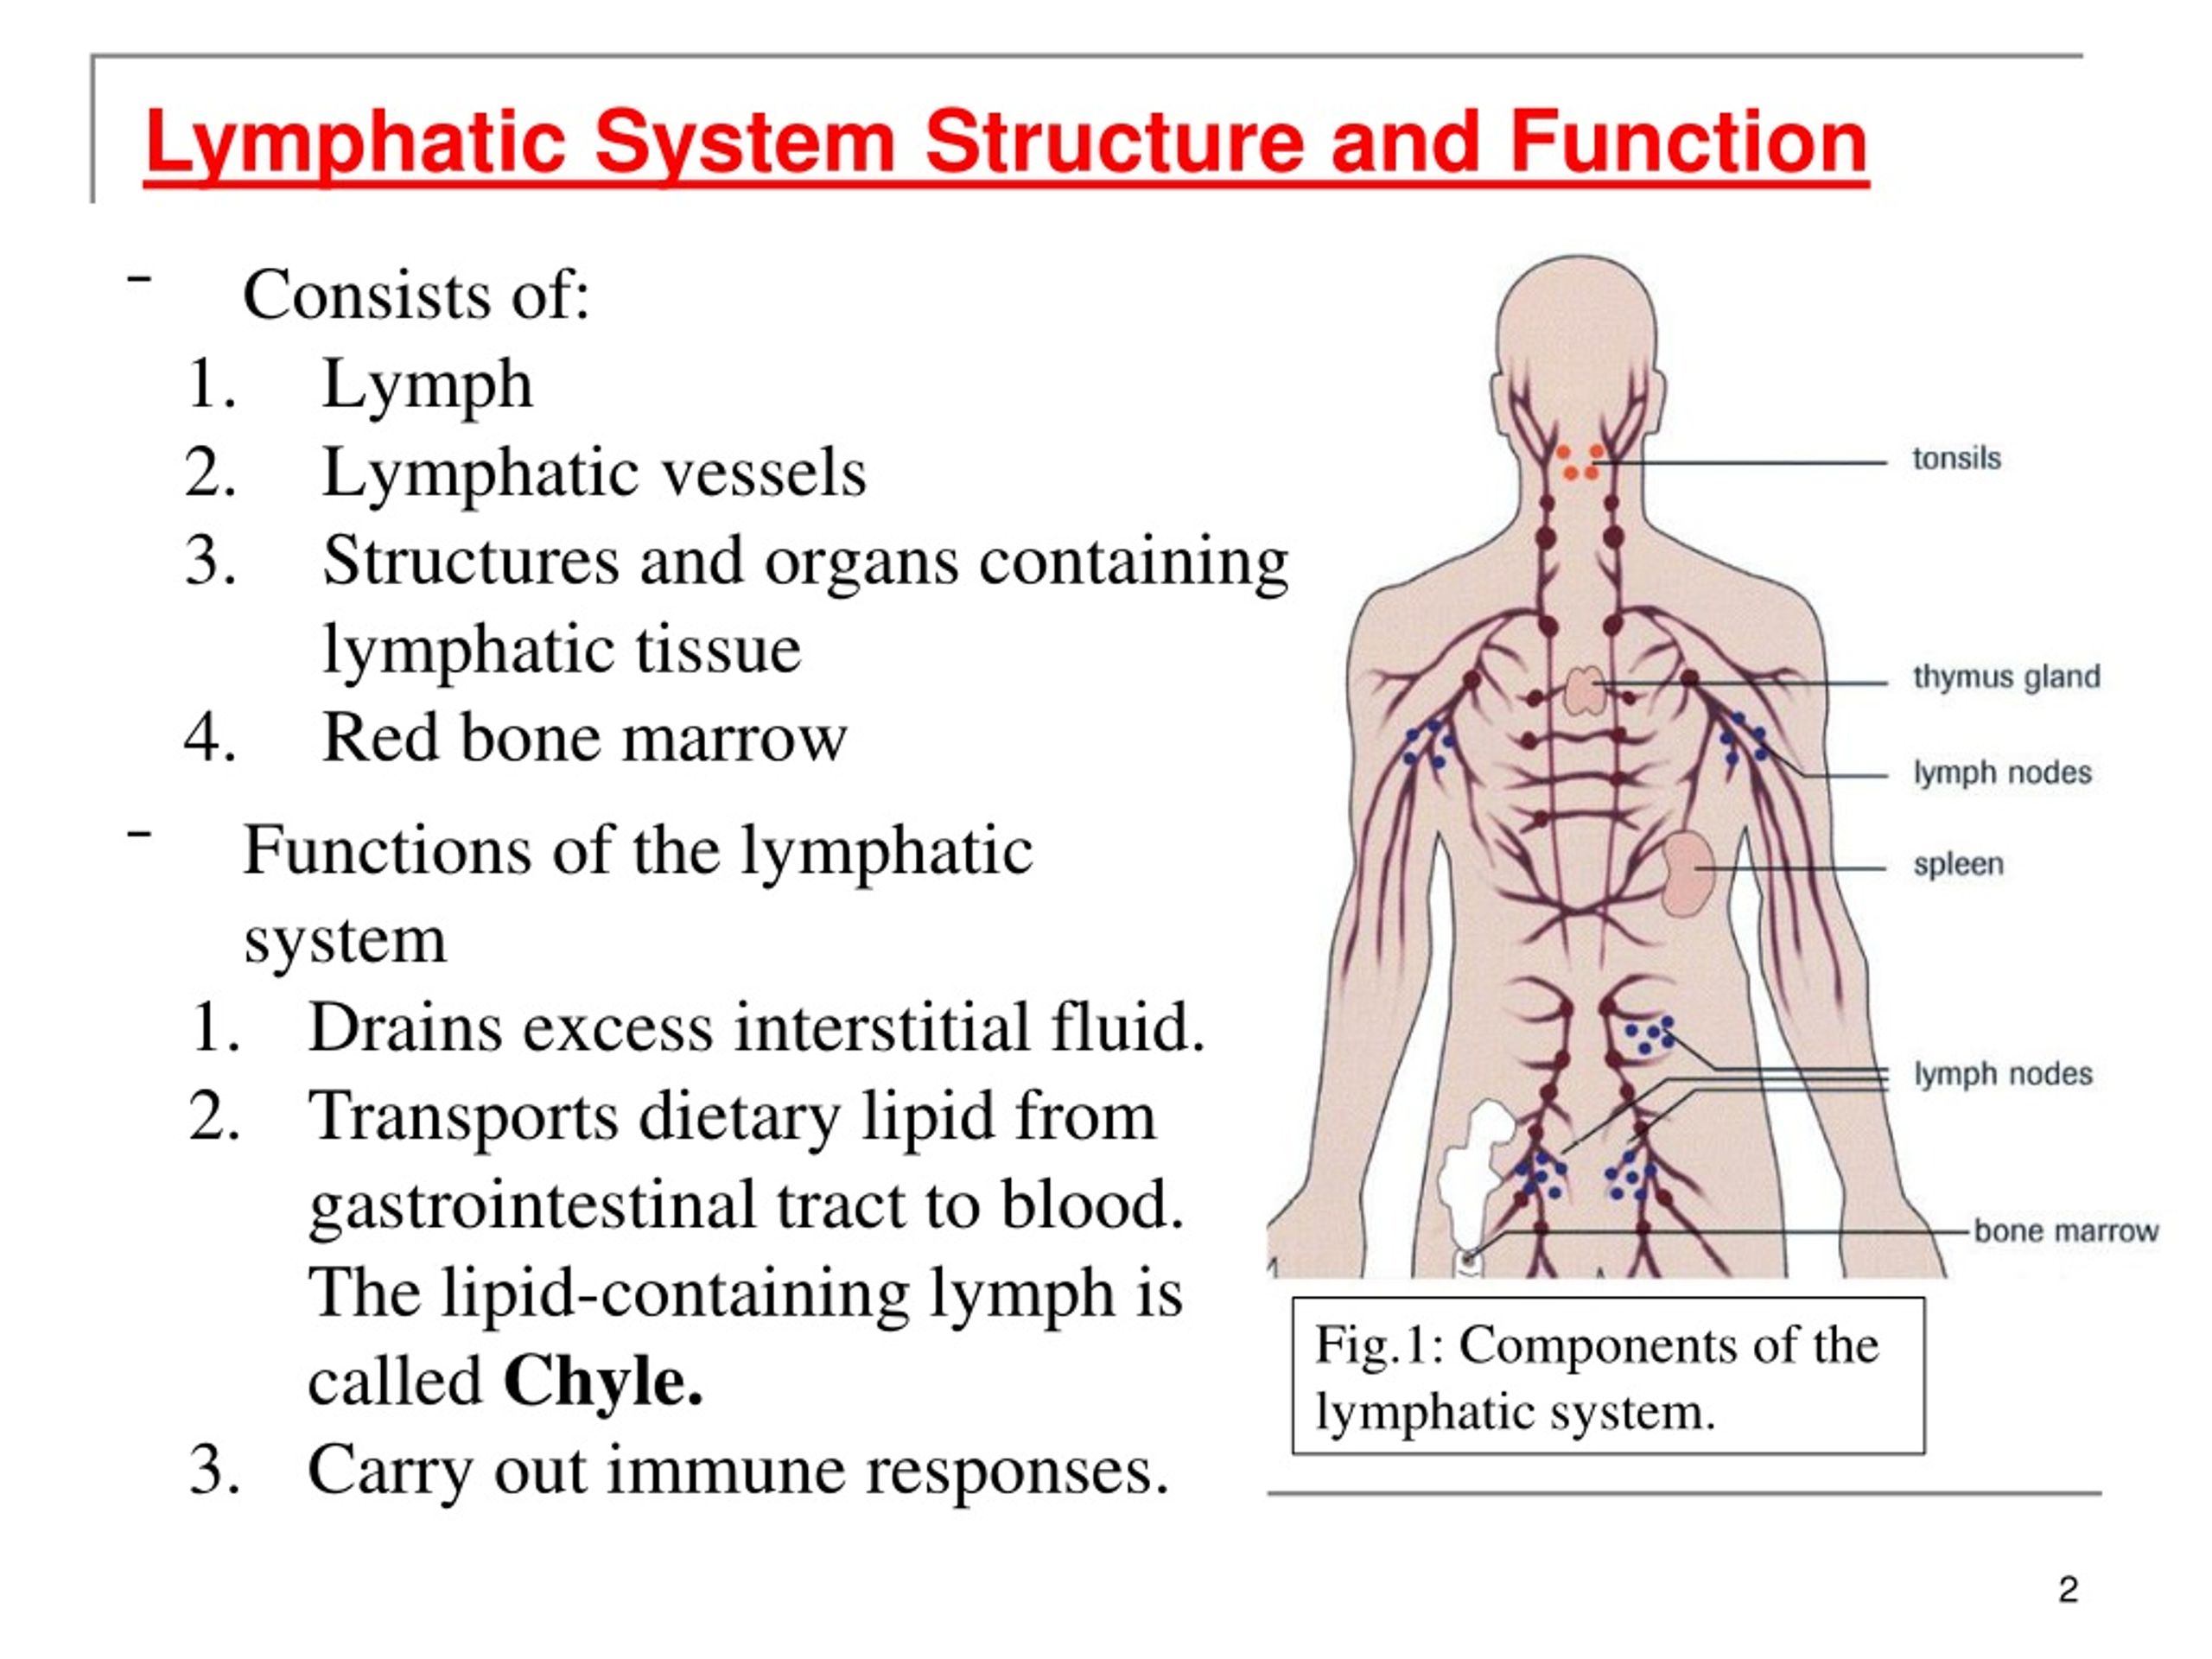 assignment on lymphatic system